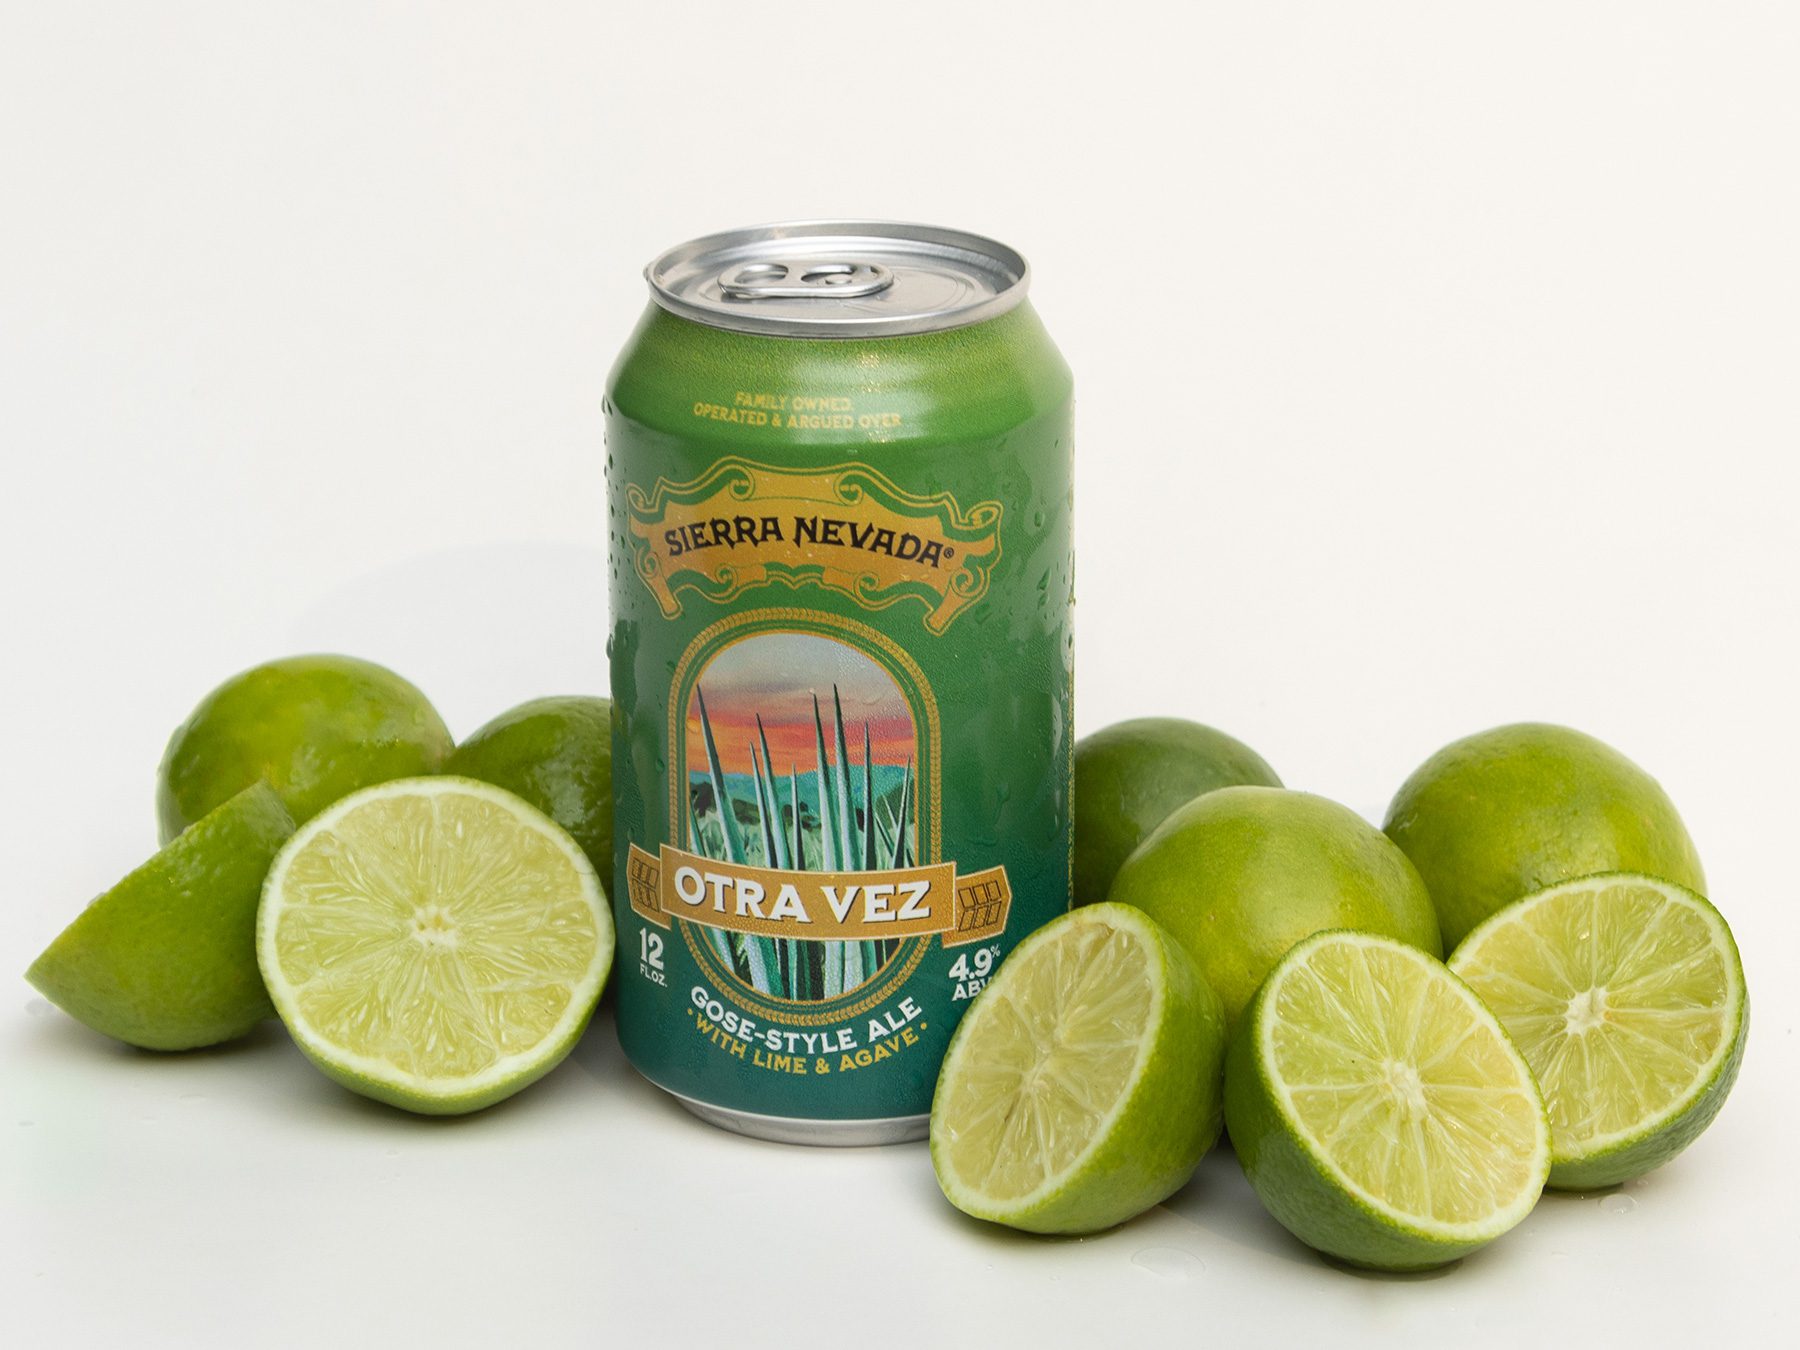 A can of Sierra Nevada Otra Vez surrounded by lime slices.